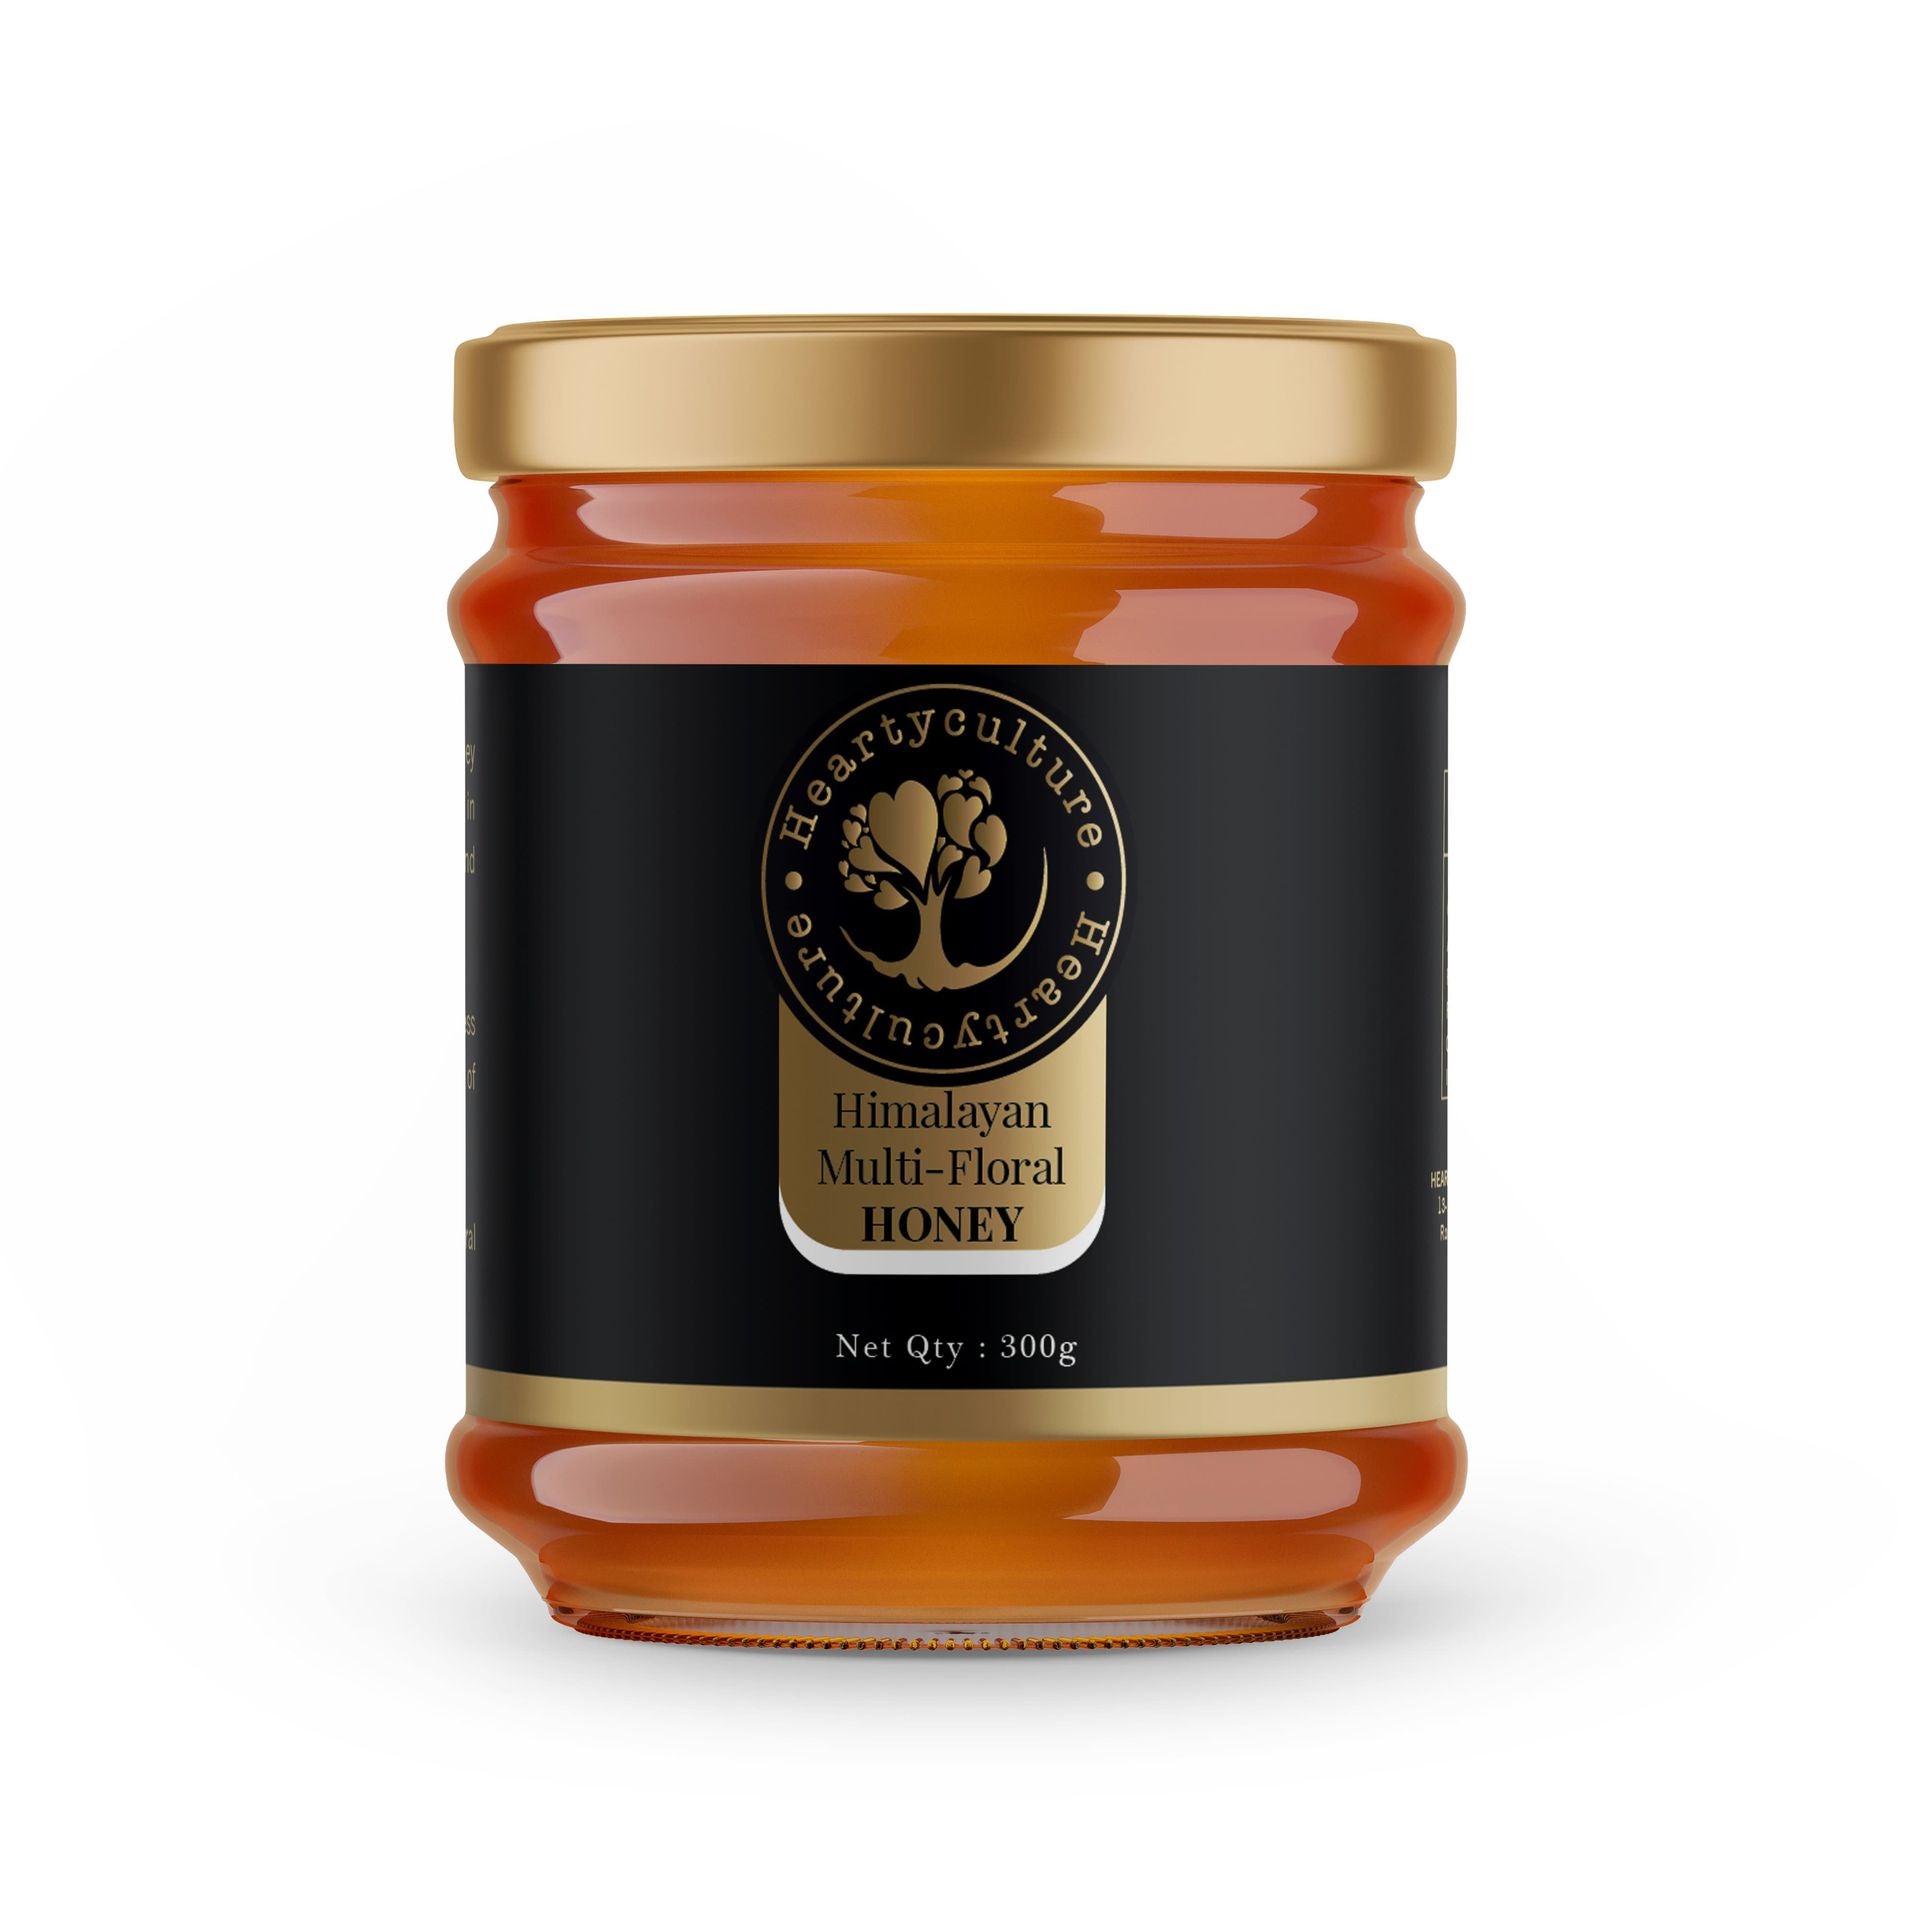 Heartyculture Himalayan Multi-Floral Honey - 300 G - hfnl!fe